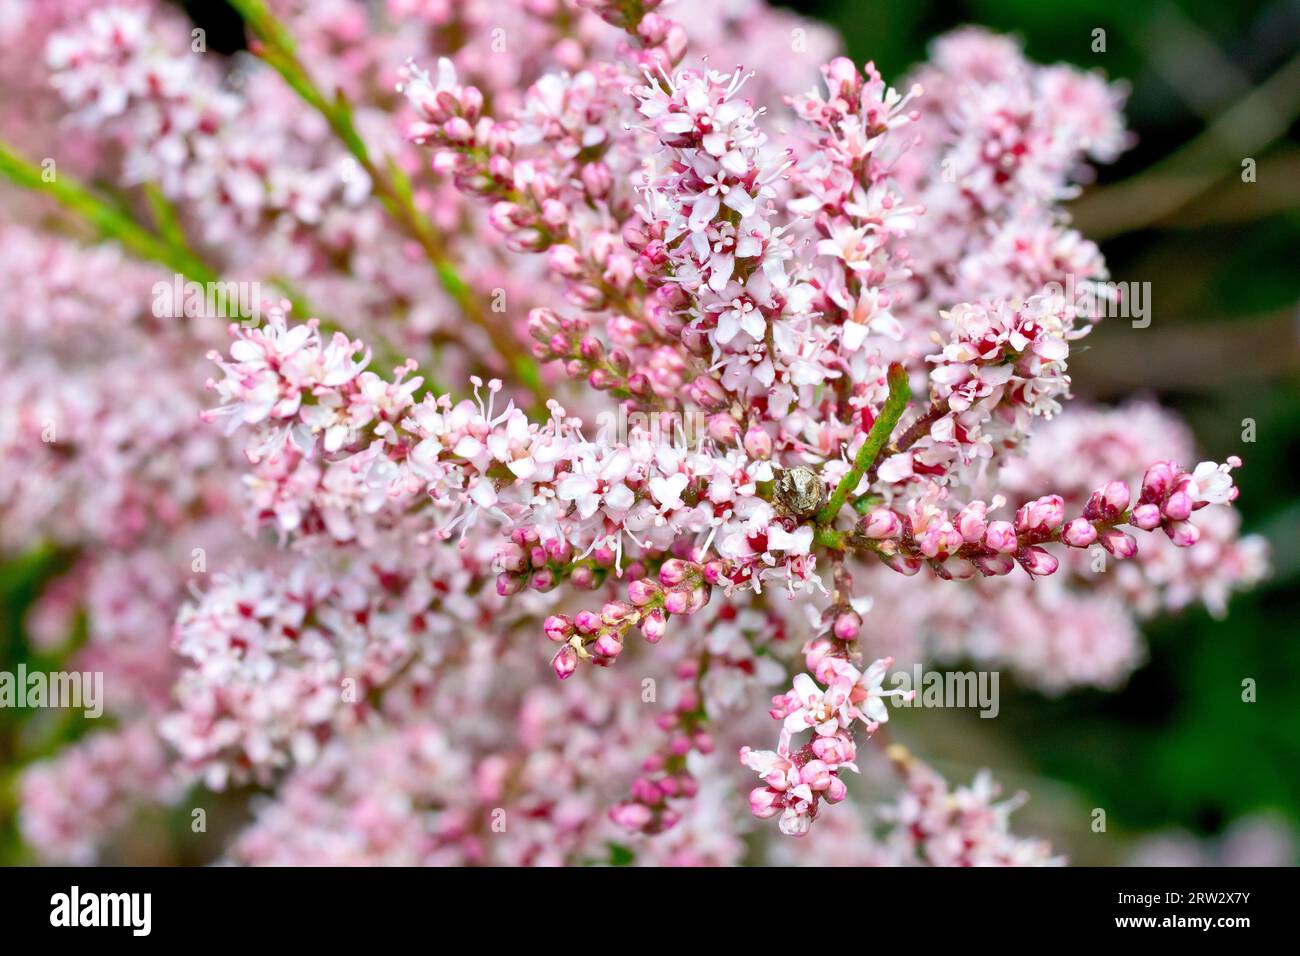 French Tamarisk (tamarix gallica), close up of the pink flowers of the evergreen shrub commonly planted in parks and occasionally found wild. Stock Photo